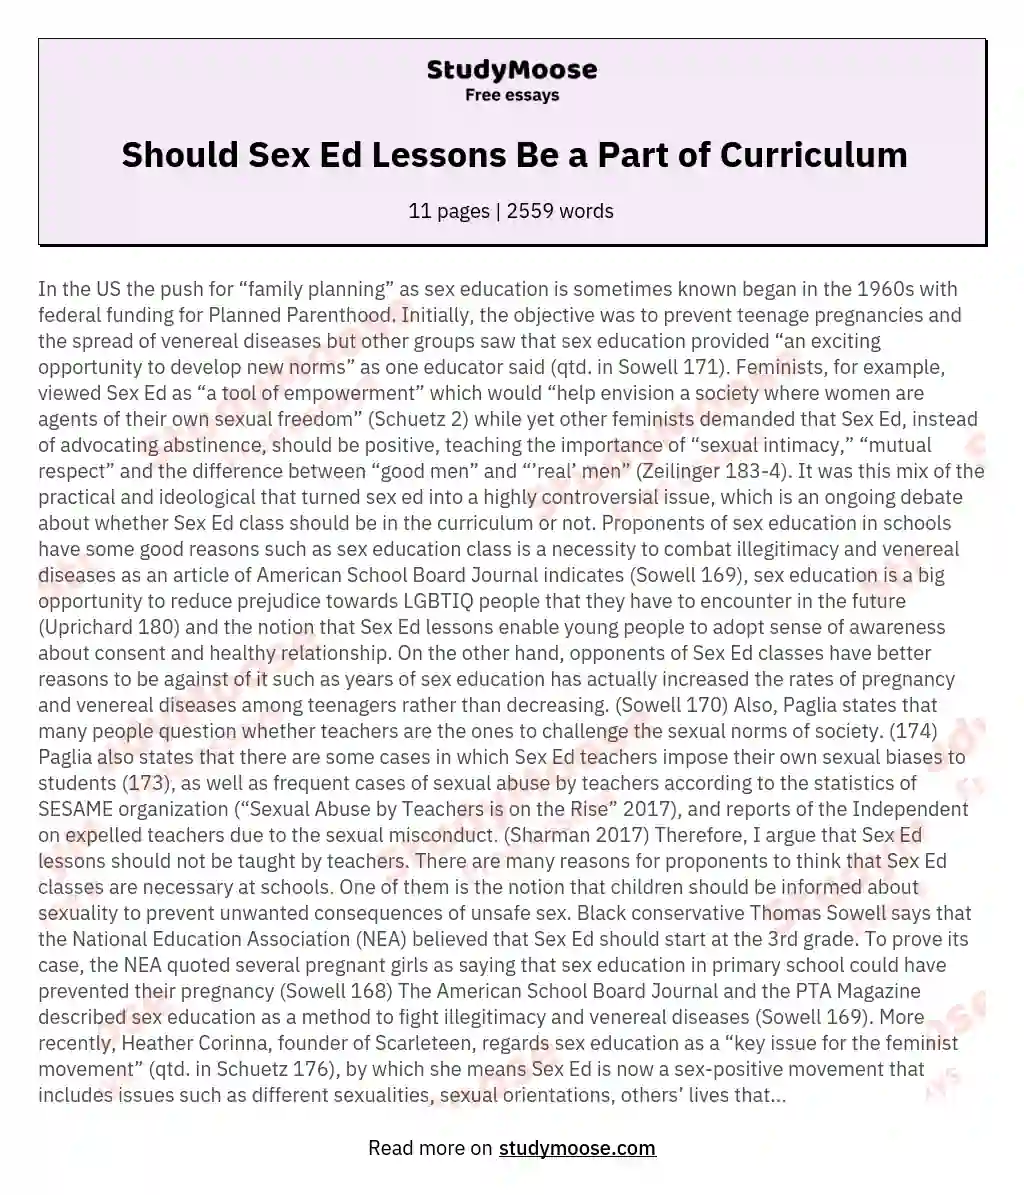 Should Sex Ed Lessons Be a Part of Curriculum essay